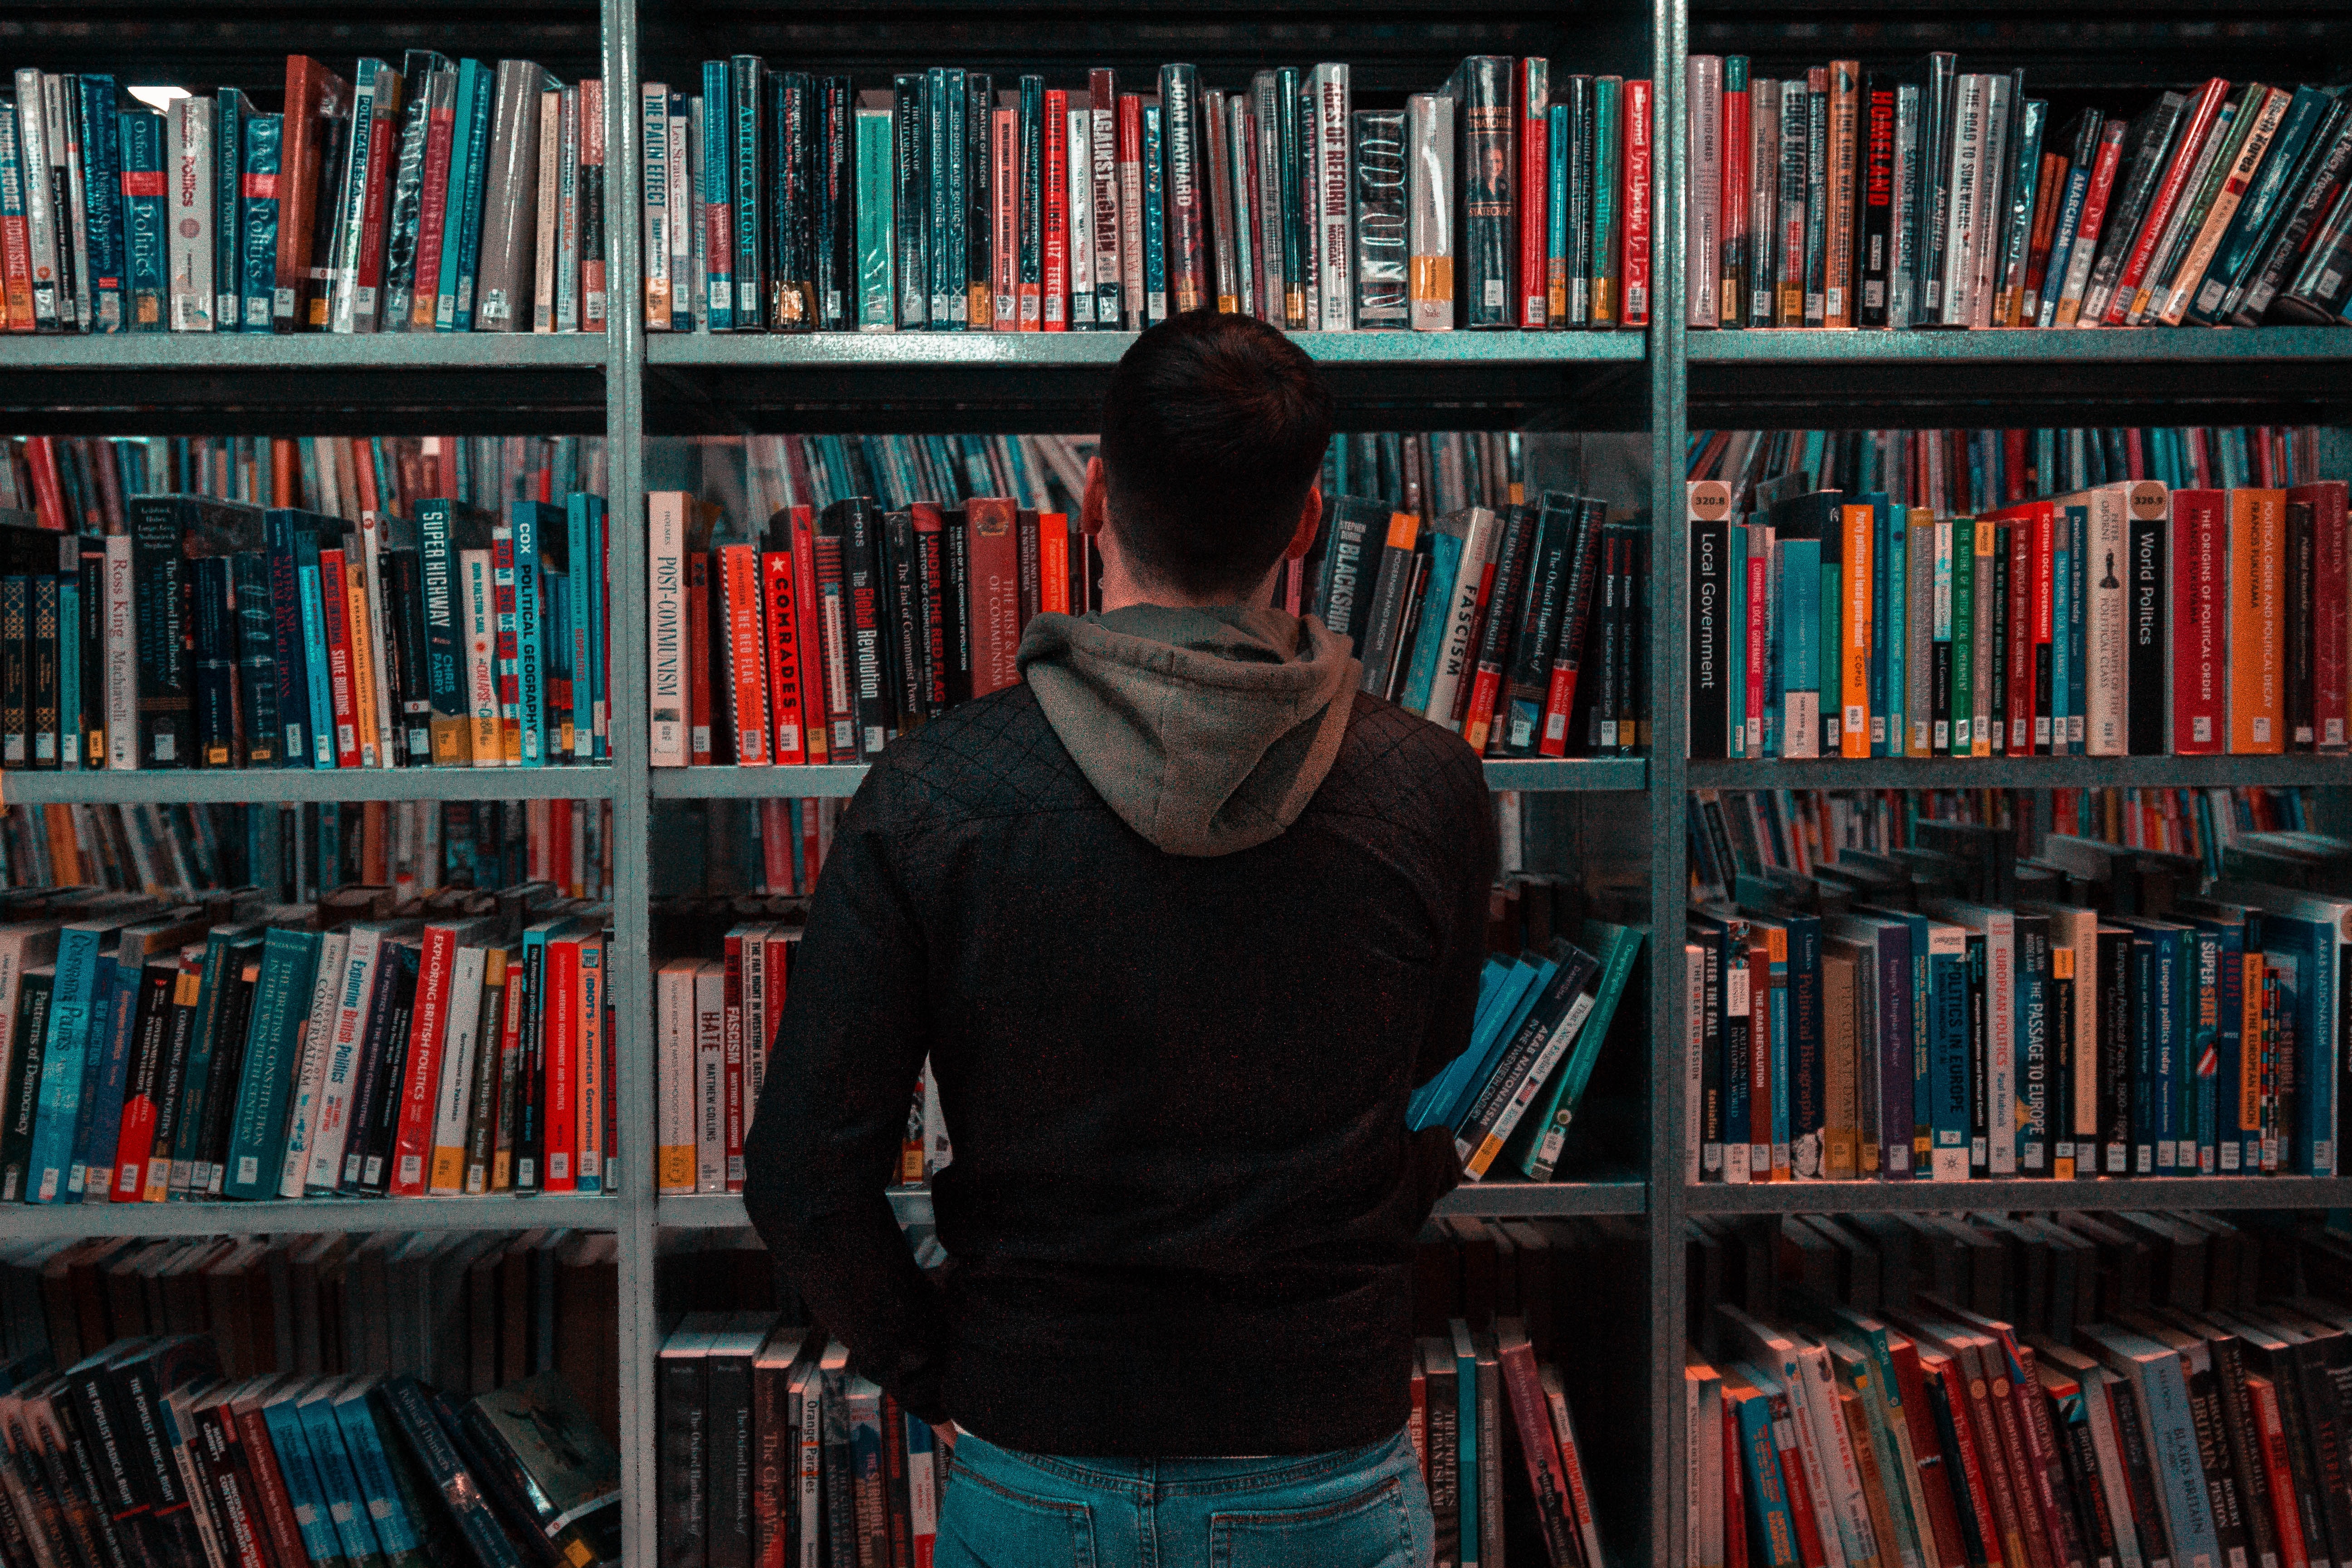 Photograph of a person with their back to the camera, facing a large bookshelf.